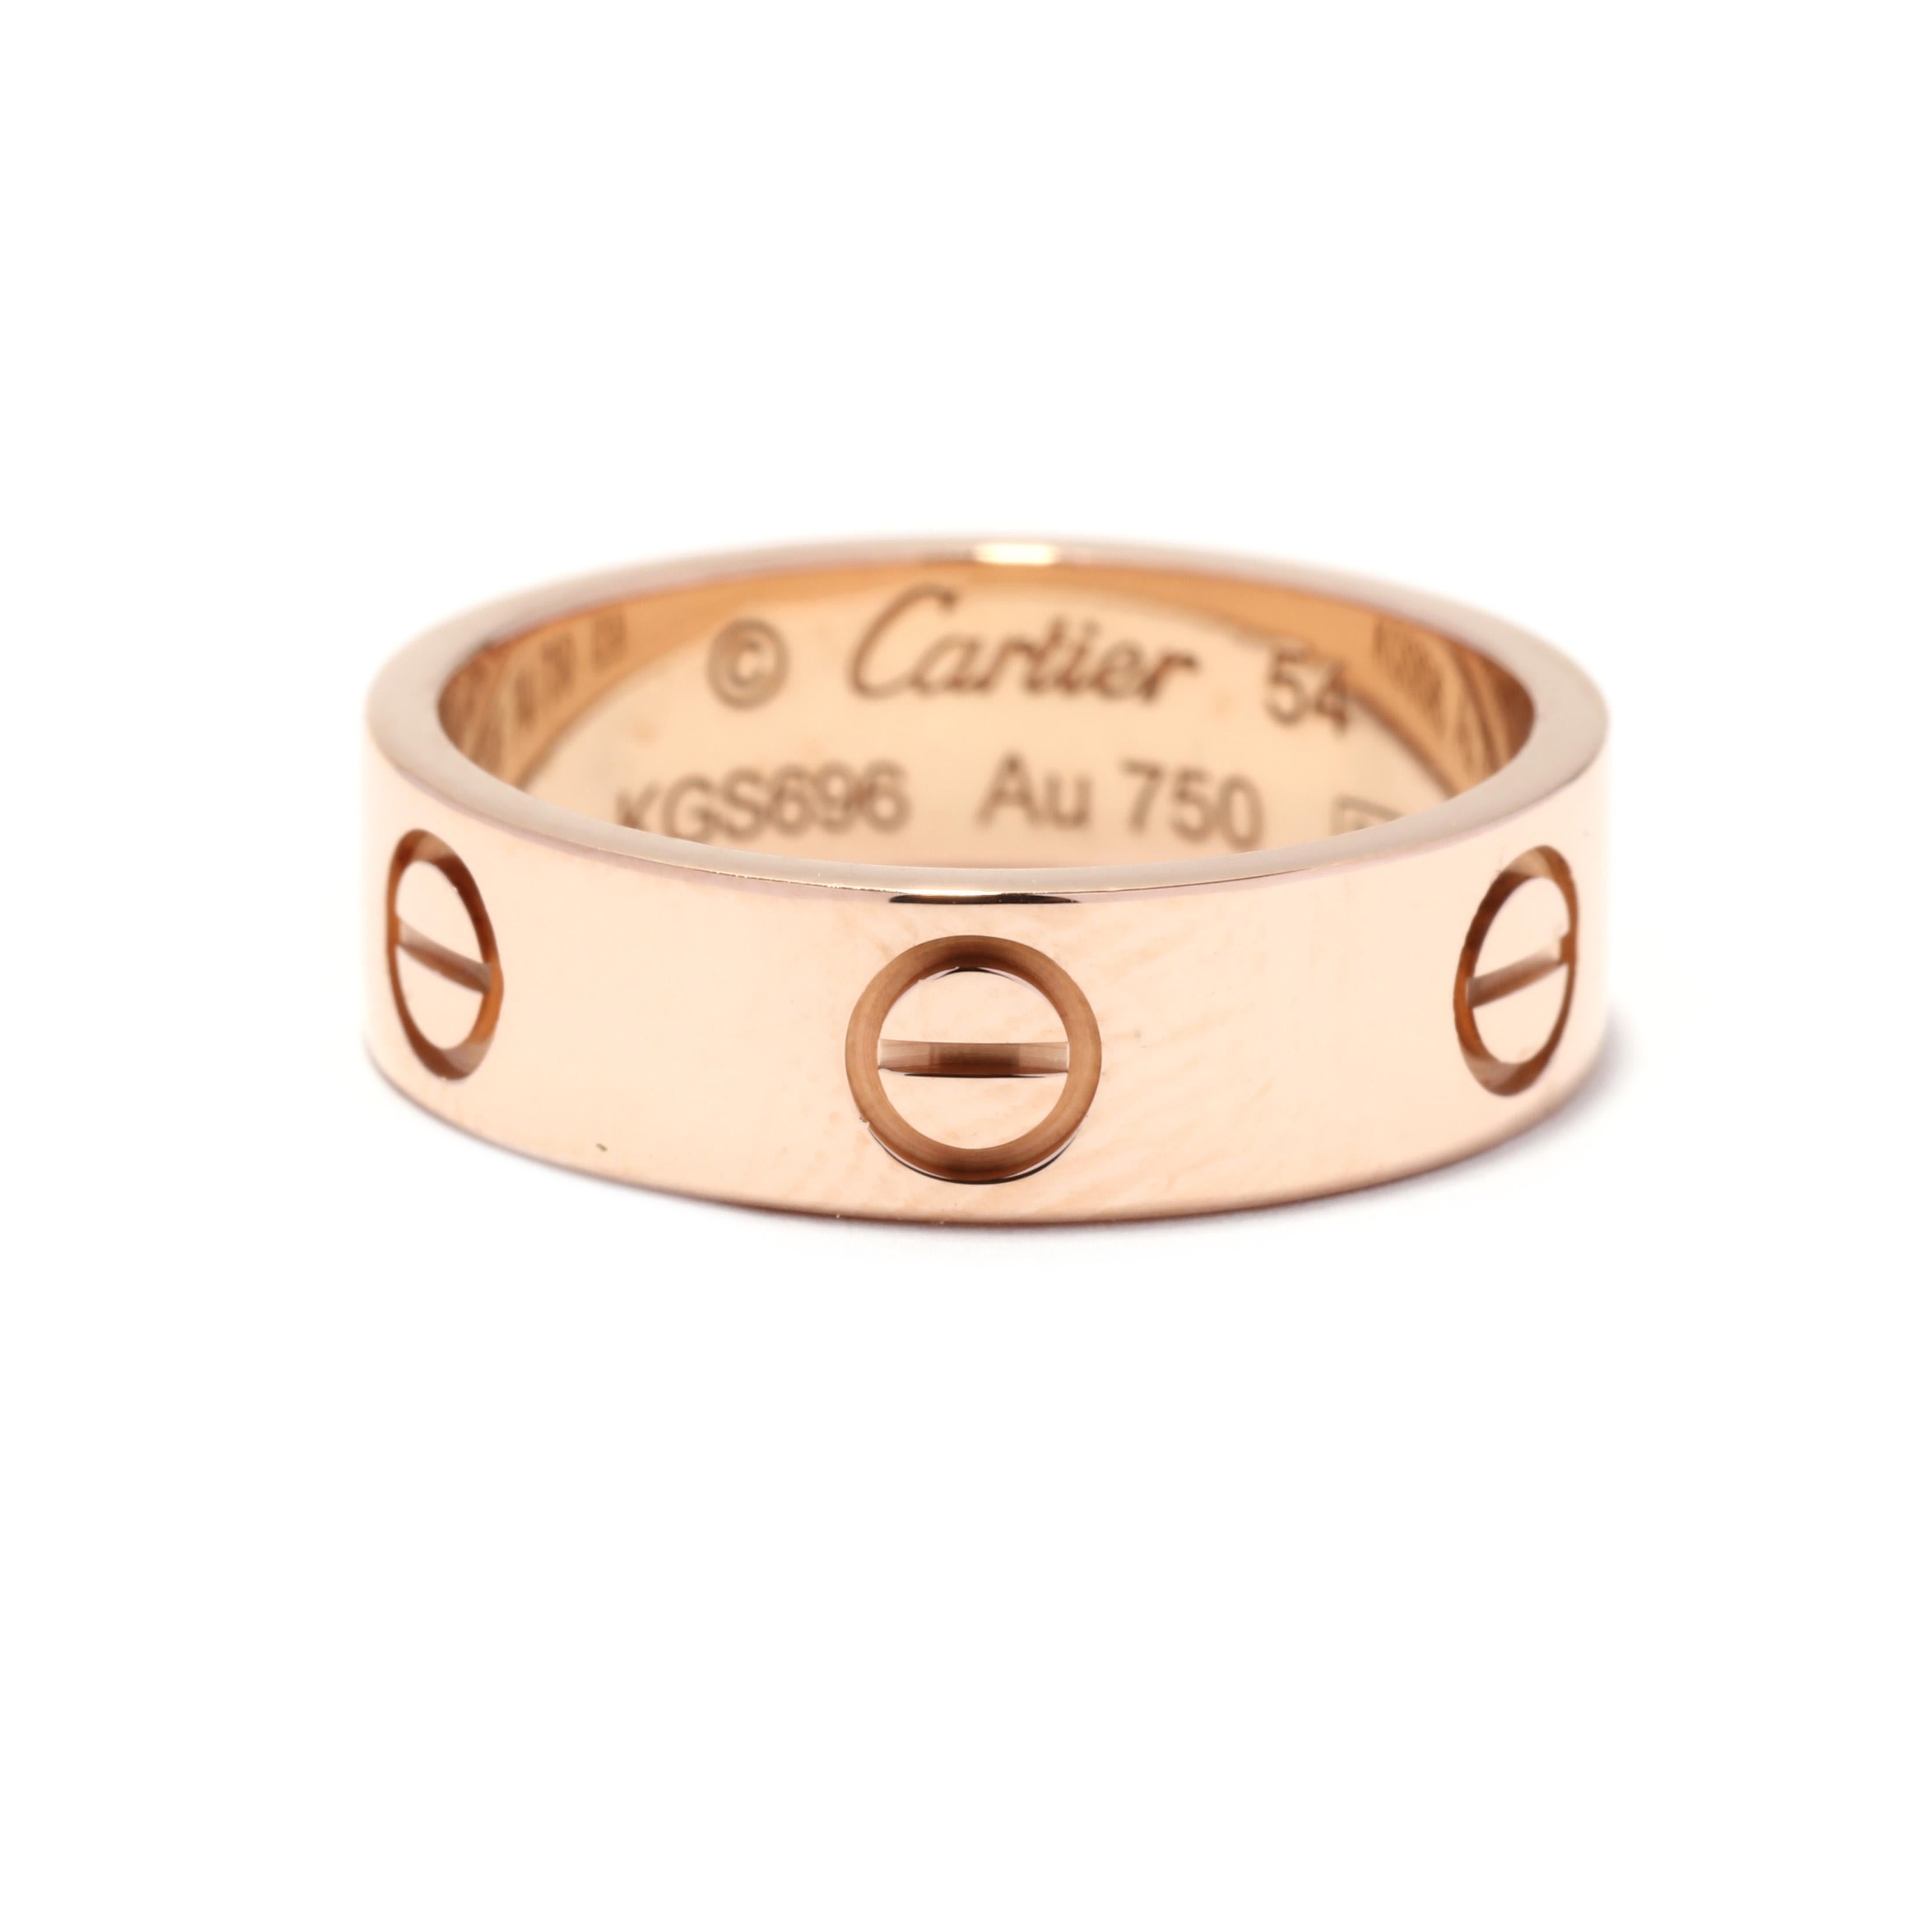 Cartier Love Band, 18k Gold, Ring, Screw Top Band, Cartier at 1stDibs